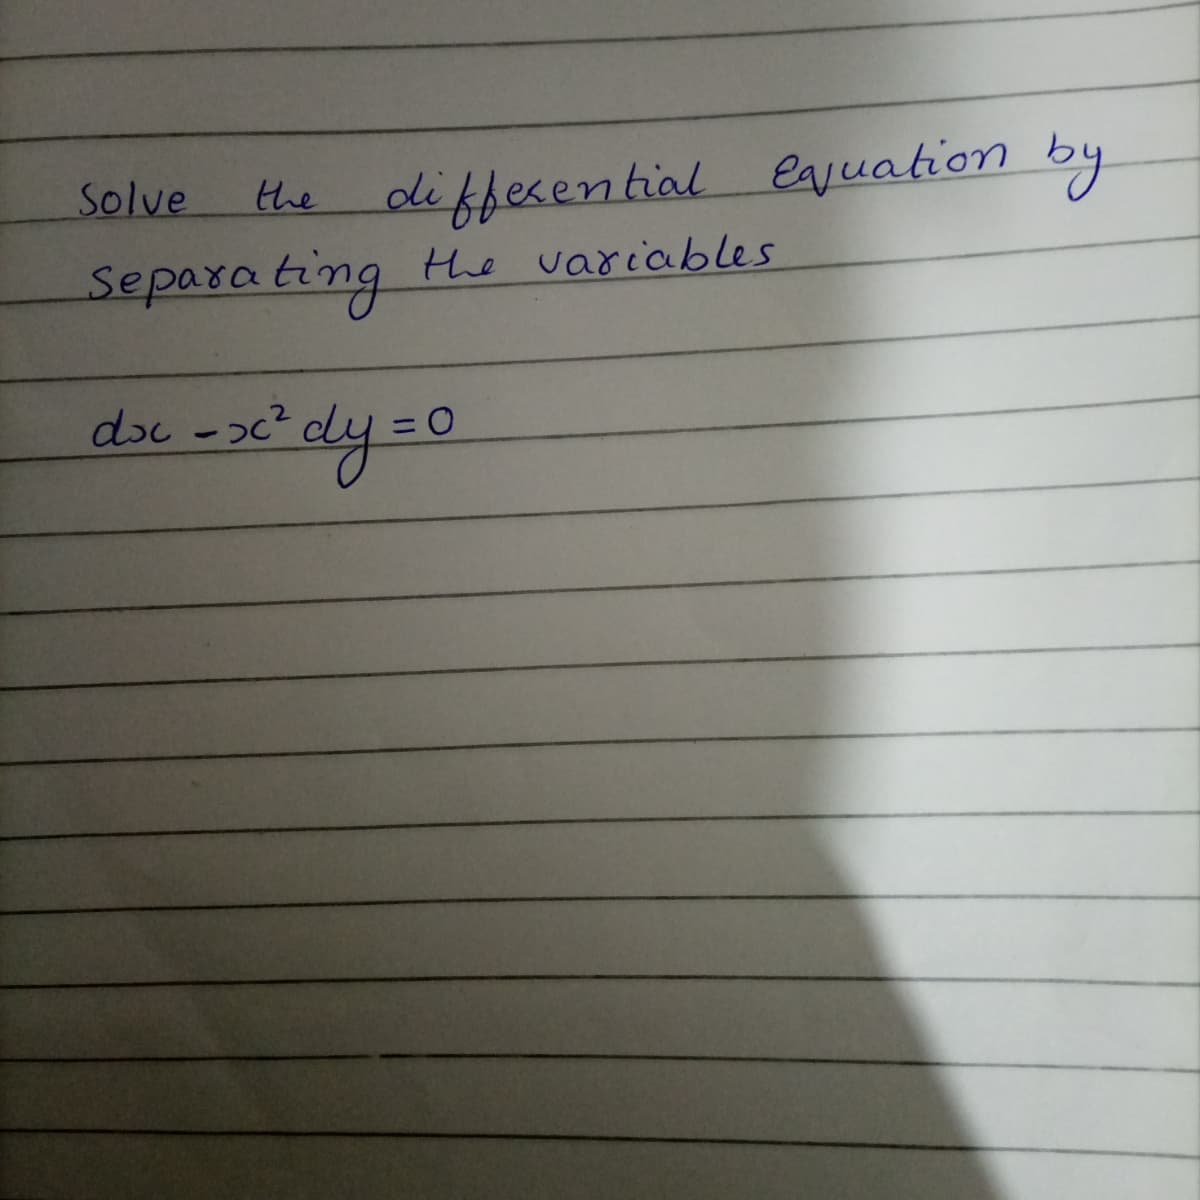 diffecential earuation by
the variables
Solve
the
Separa ting
dy=D0
1
